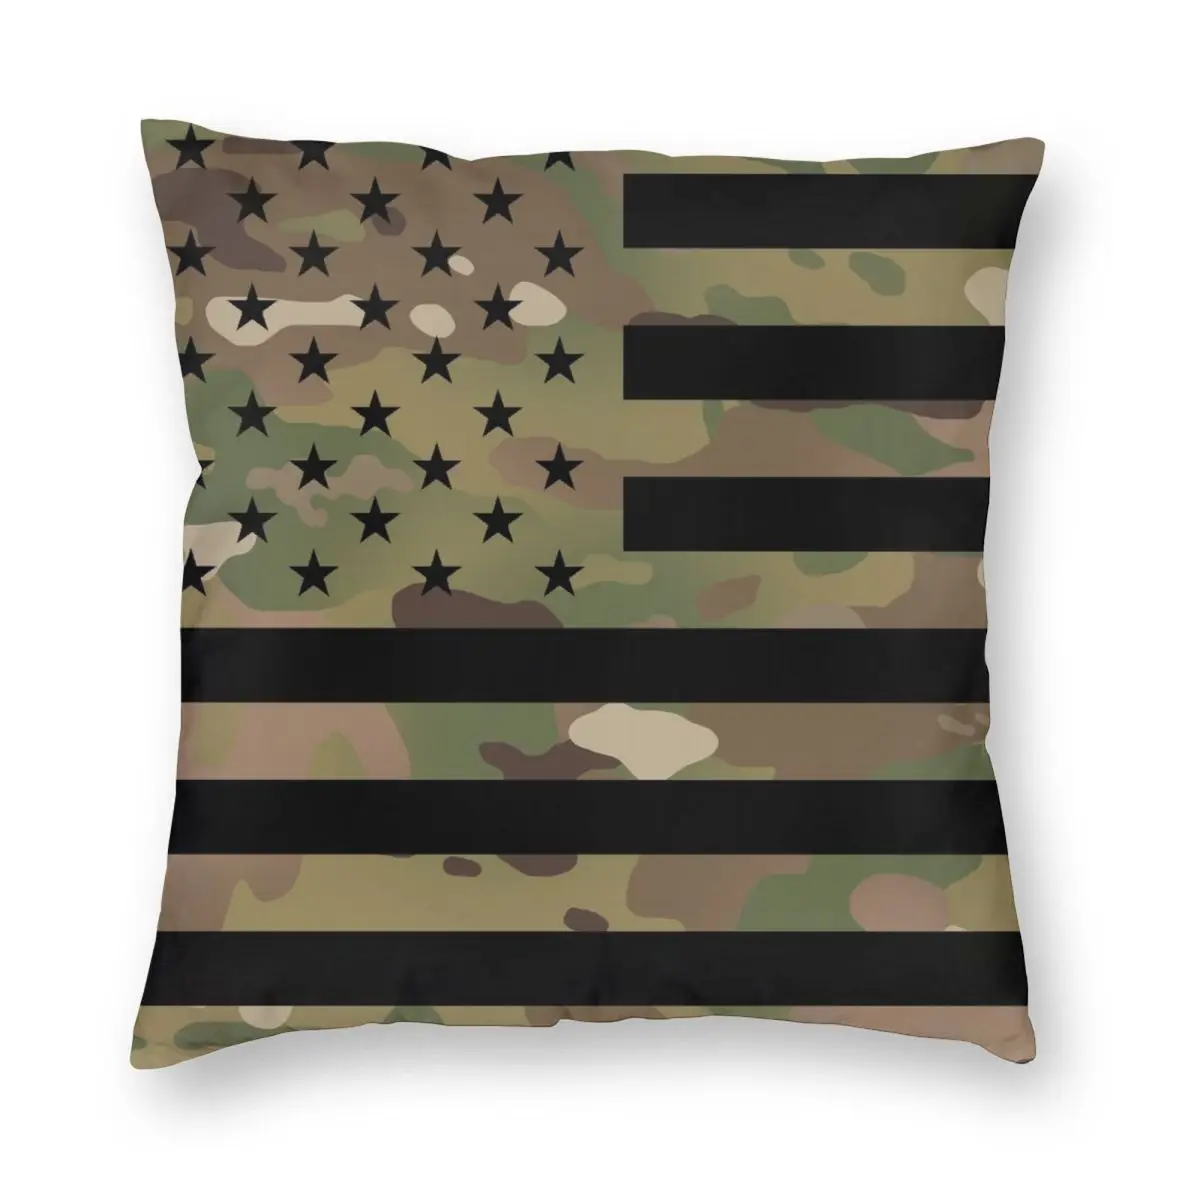 

U.S. Flag Military Camouflage Army Camo Pillowcase Soft Polyester Cushion Cover Gift Throw Pillow Case Cover Home 45*45cm